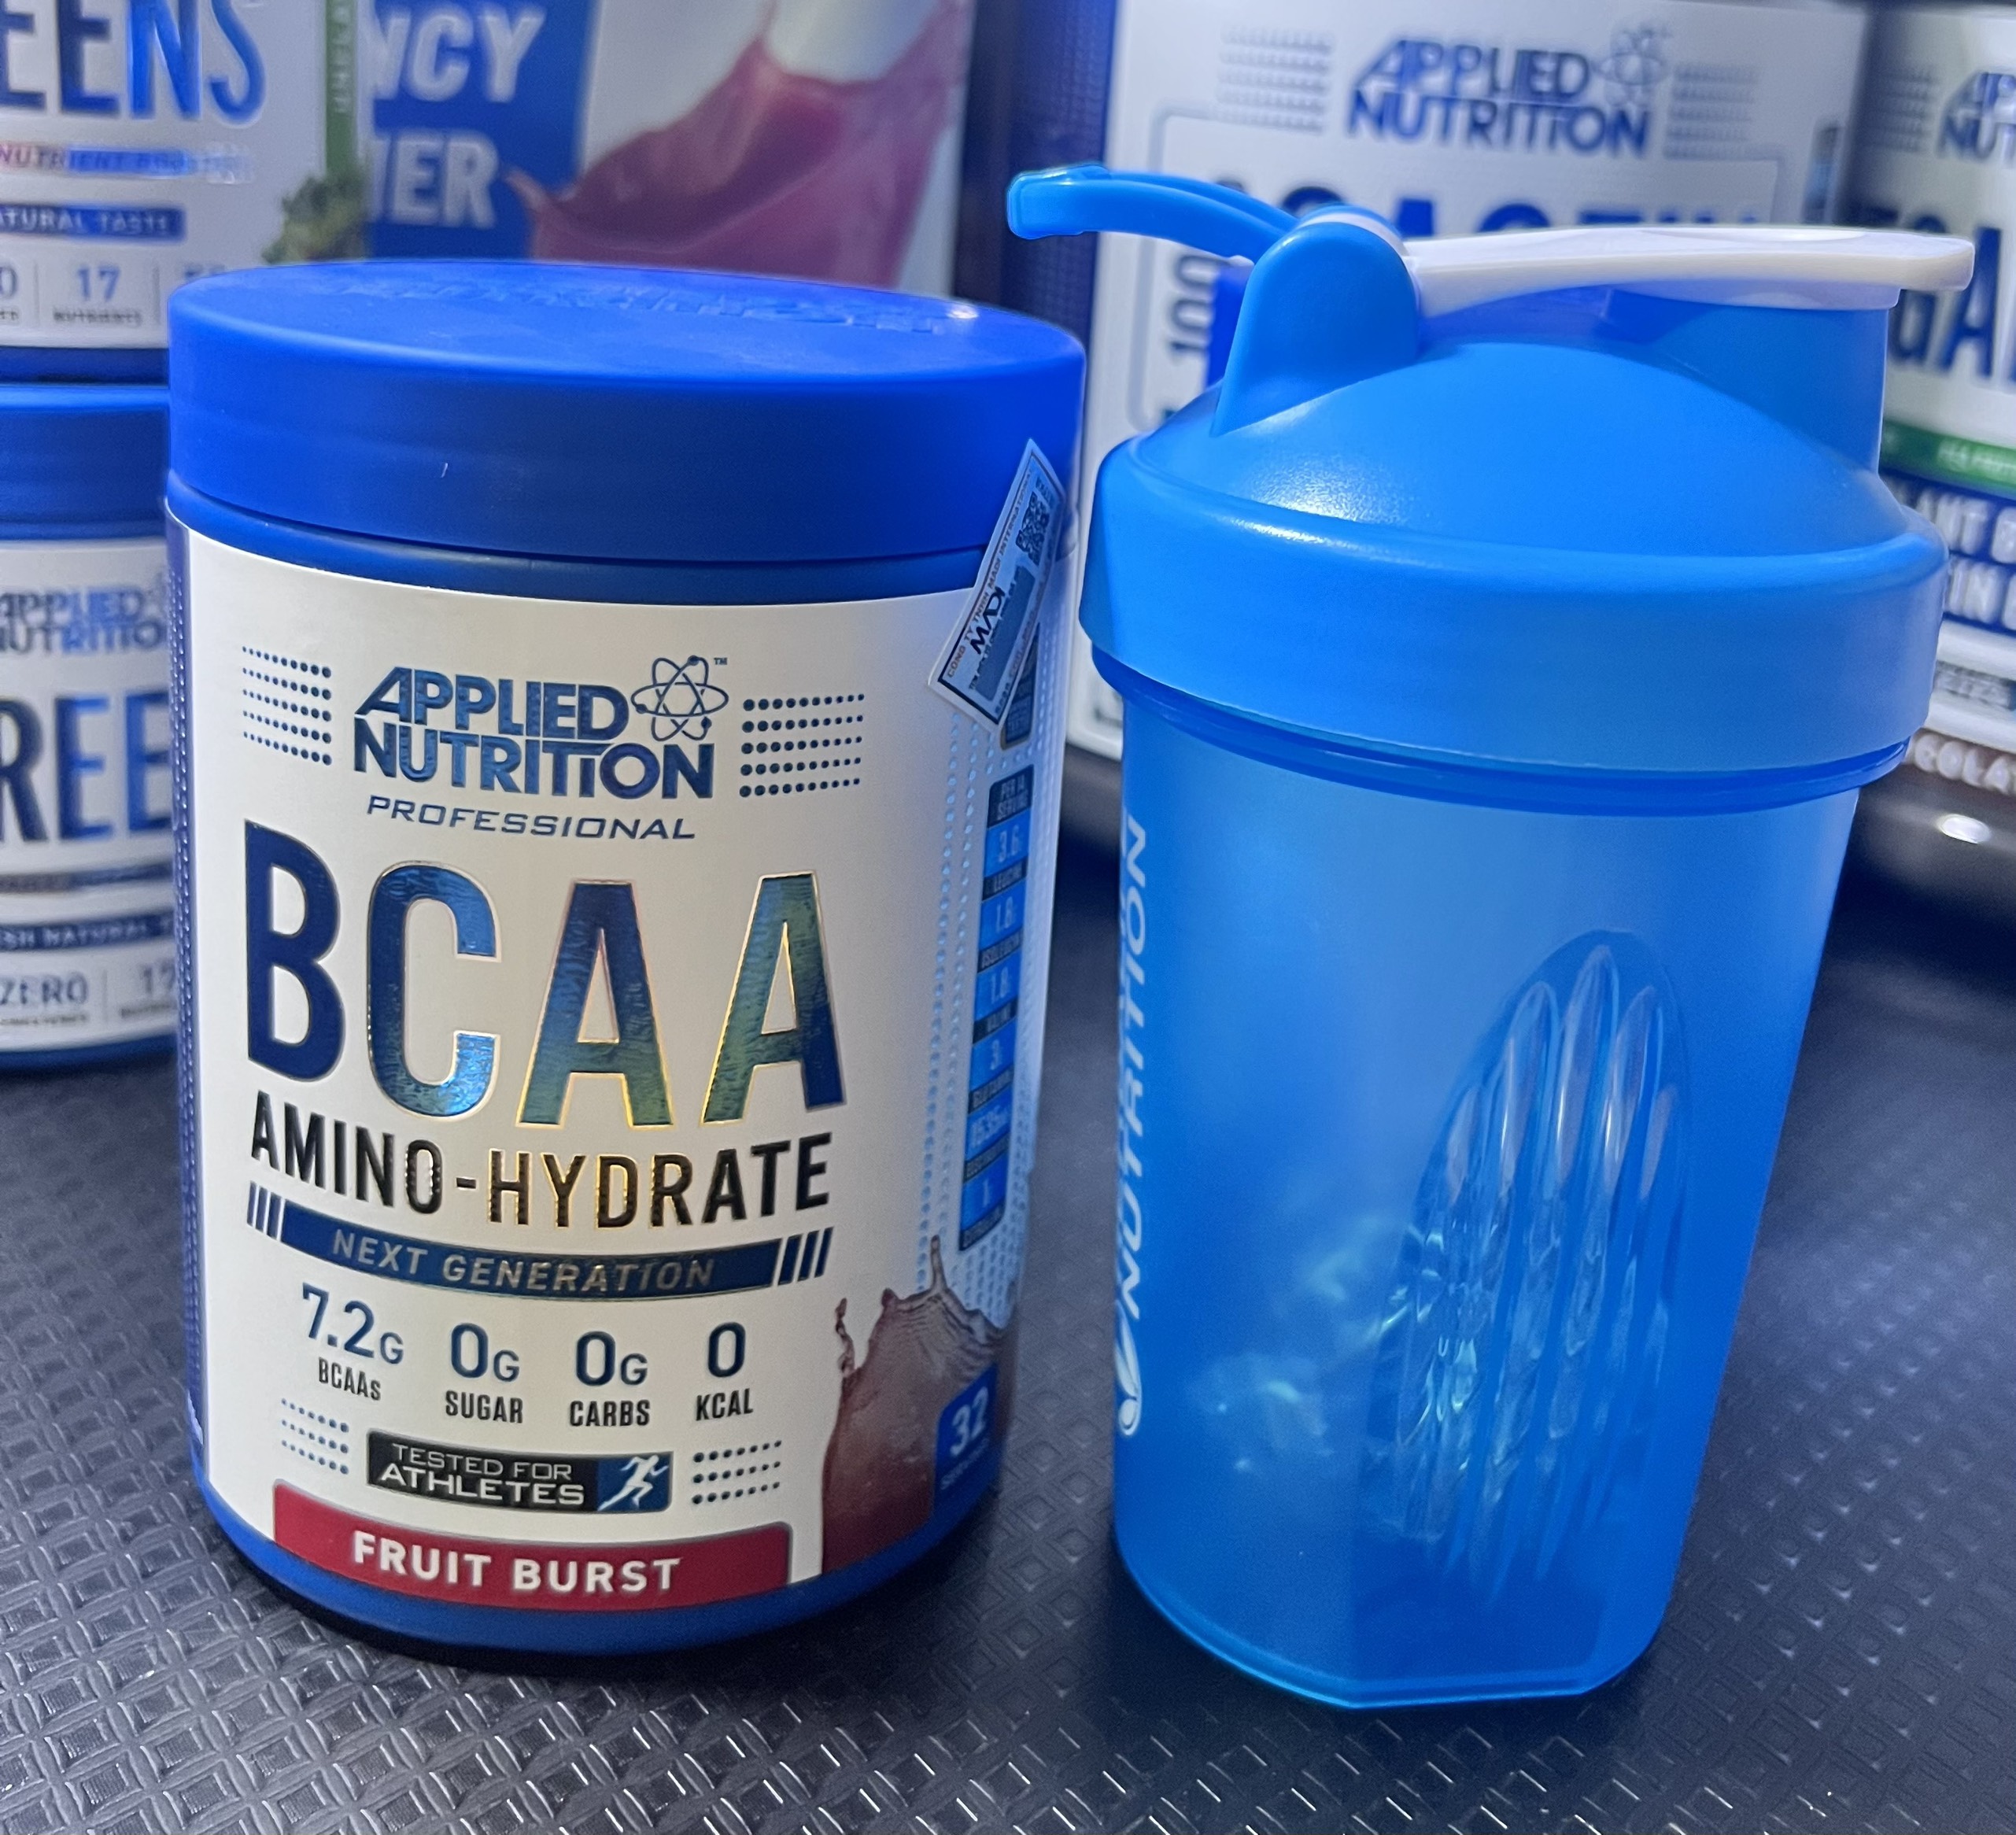 BCAA Amino Hydrate 32 servings Applied Nutrition